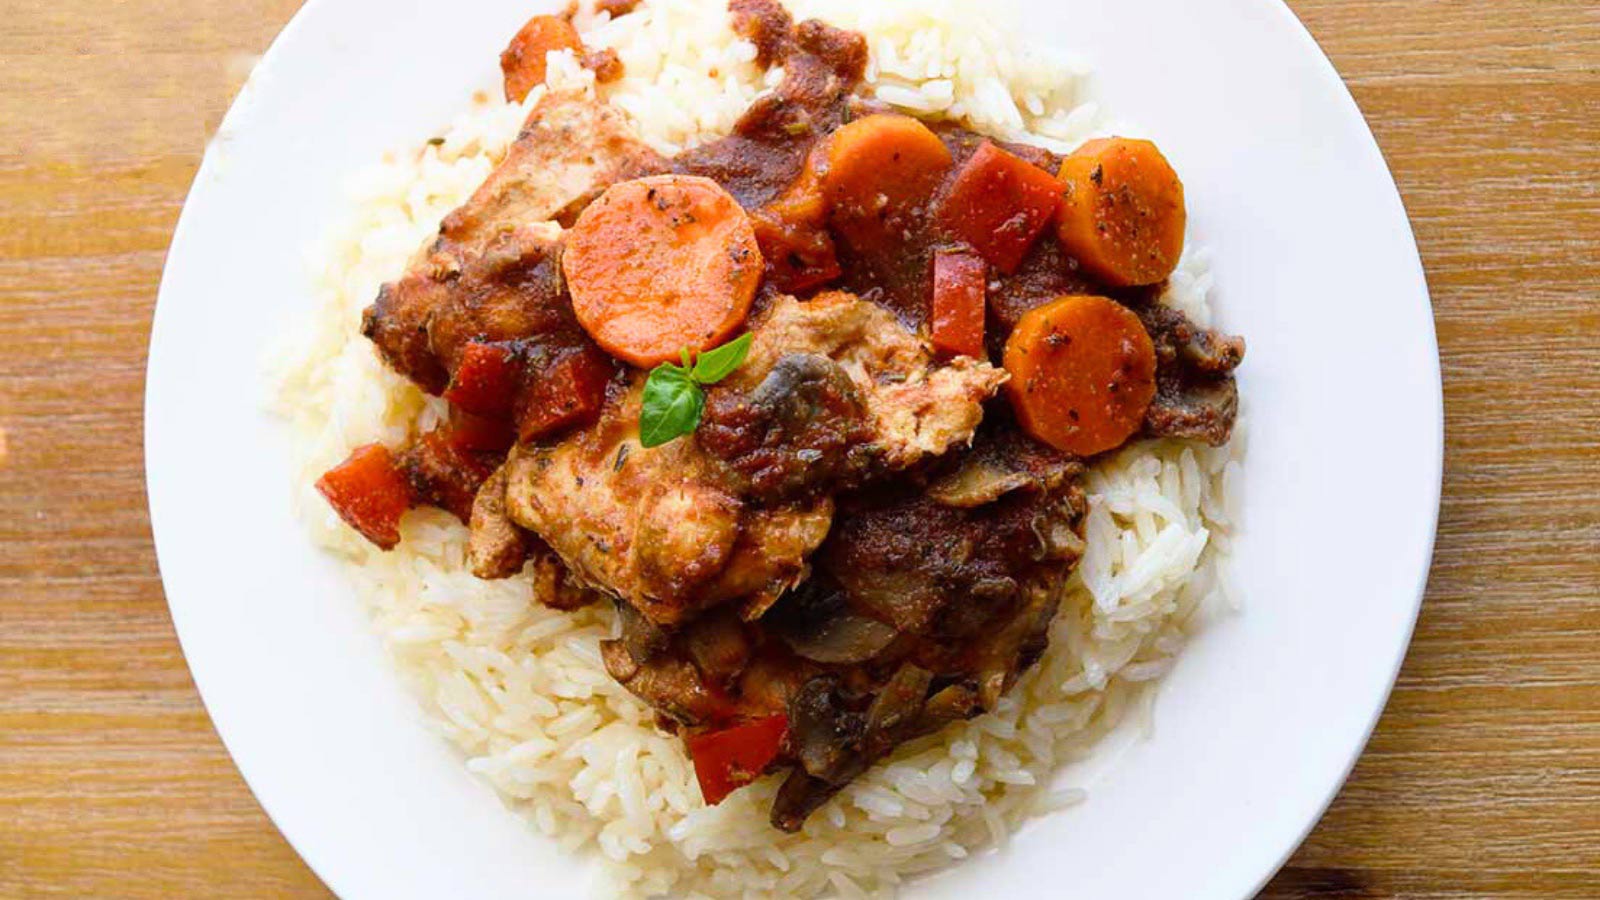 And overhead view looking down onto a plate of Slow Cooker Chicken Cacciatore over white rice.